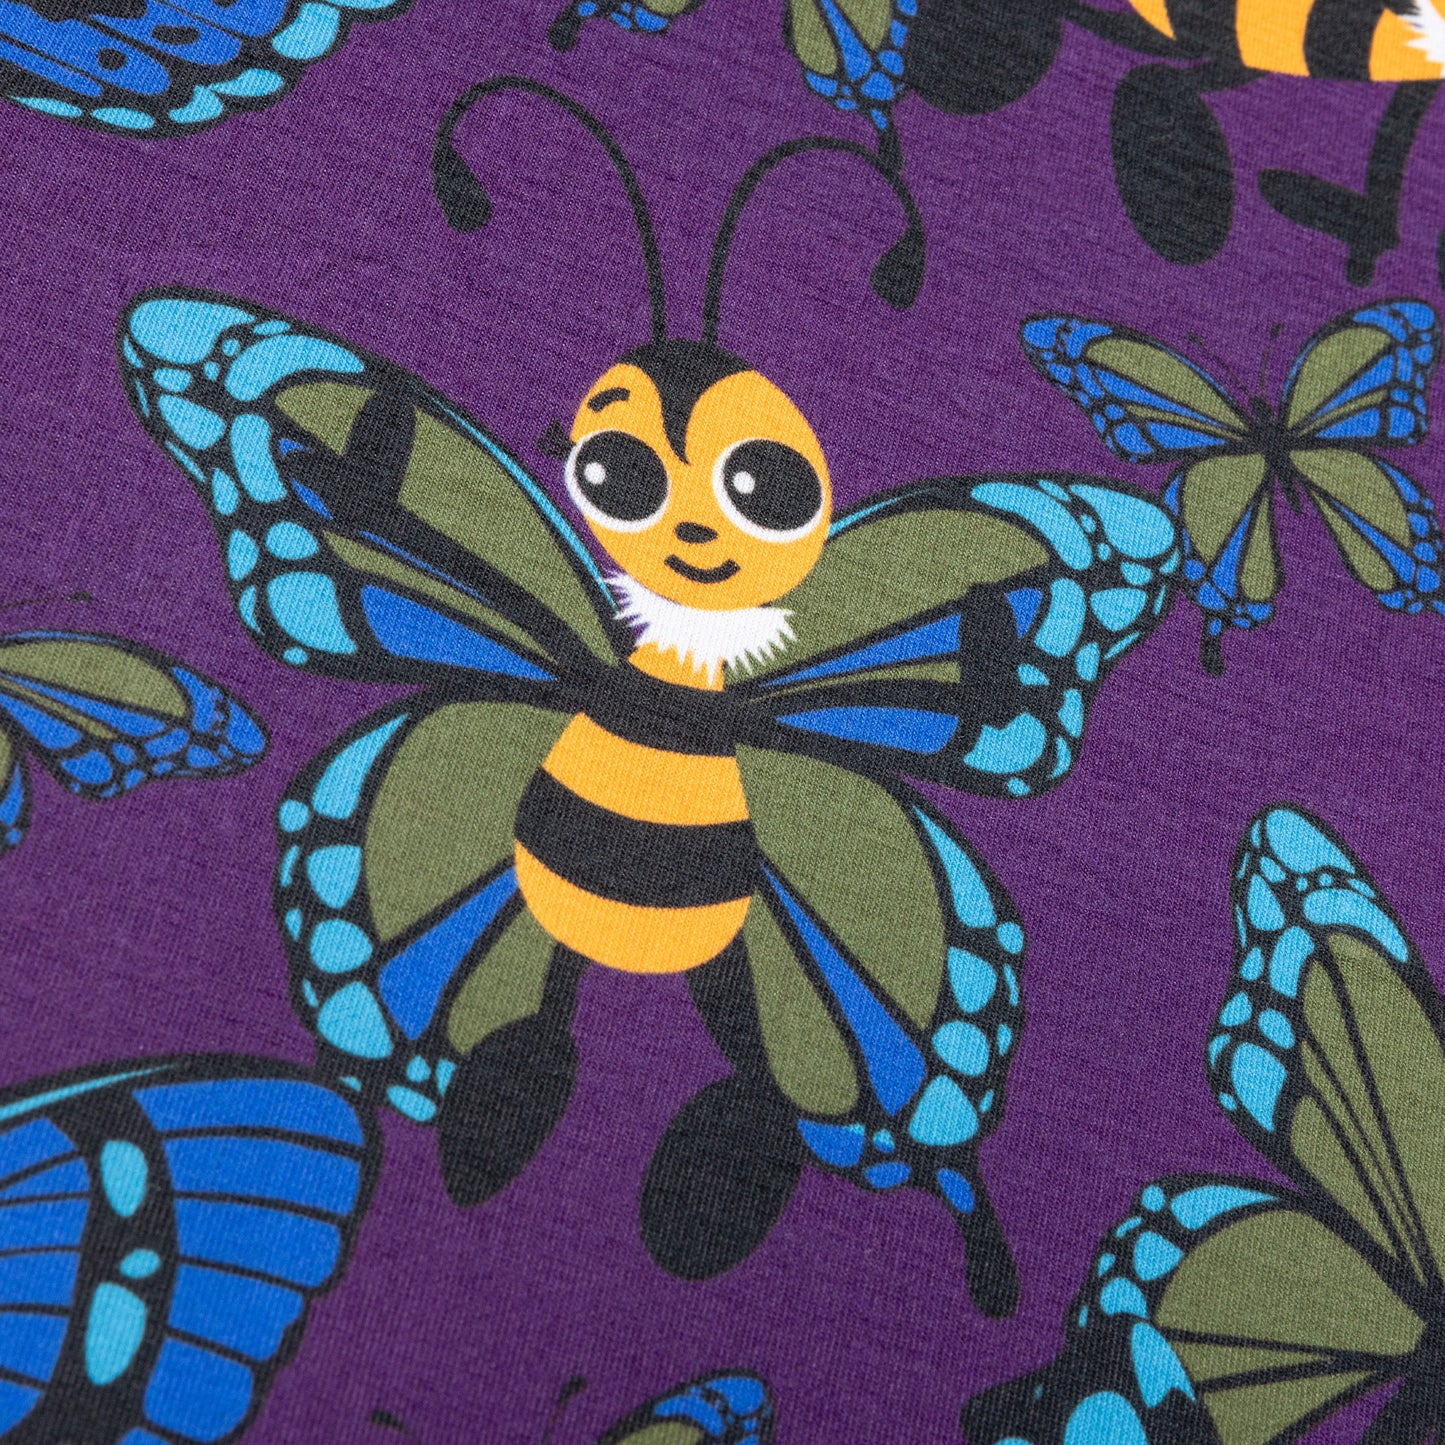 A close up of cute cartoon bees with butterfly wings. The bees are yellow and black with eyelashes, their wings are blue and green. They are against a purple background with various sized butterflies too.